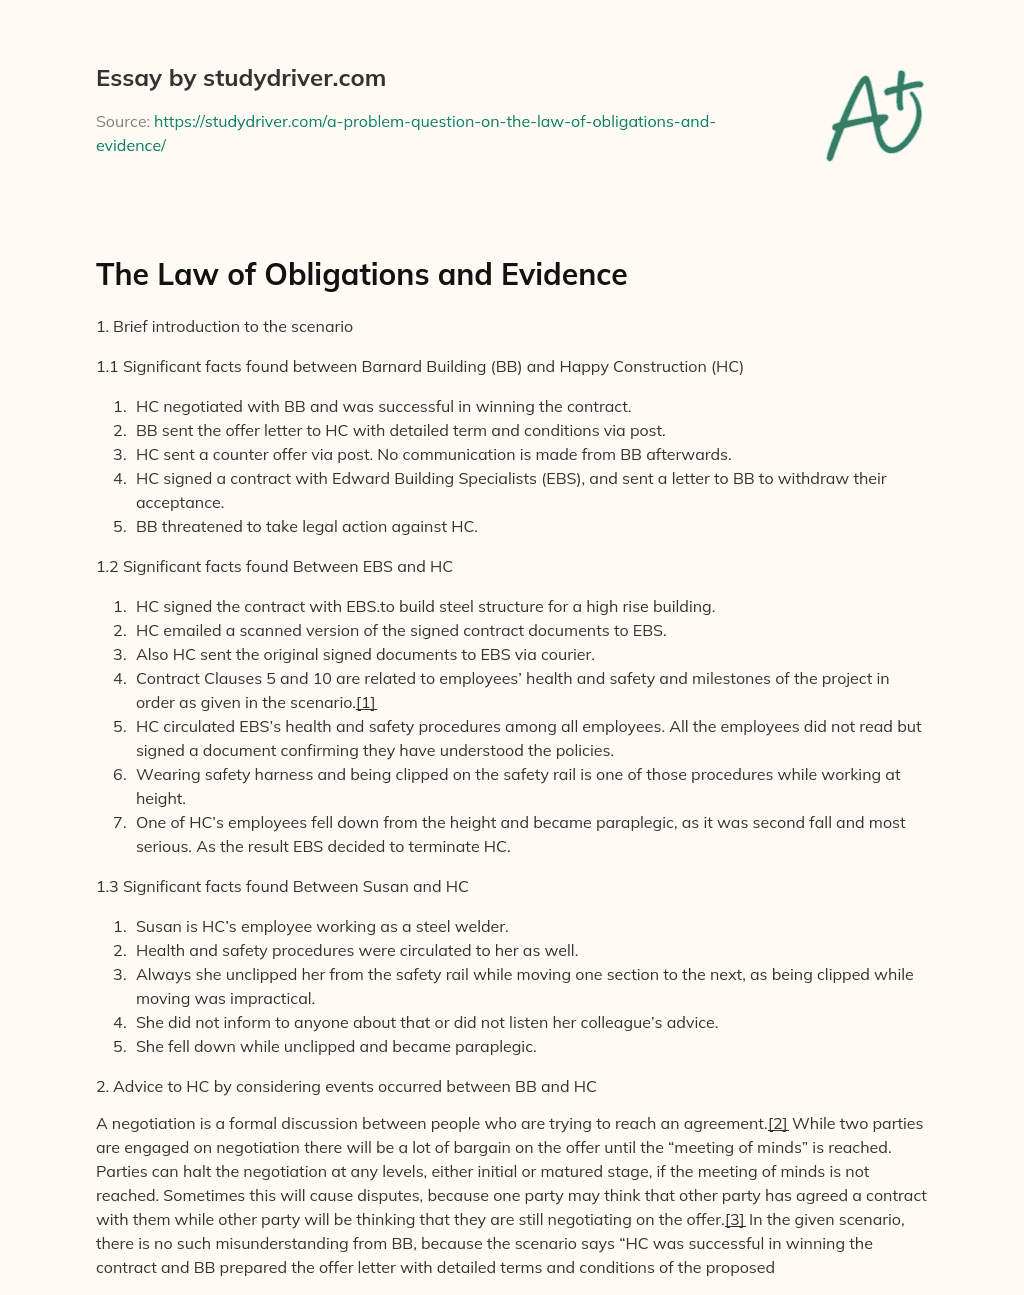 The Law of Obligations and Evidence essay